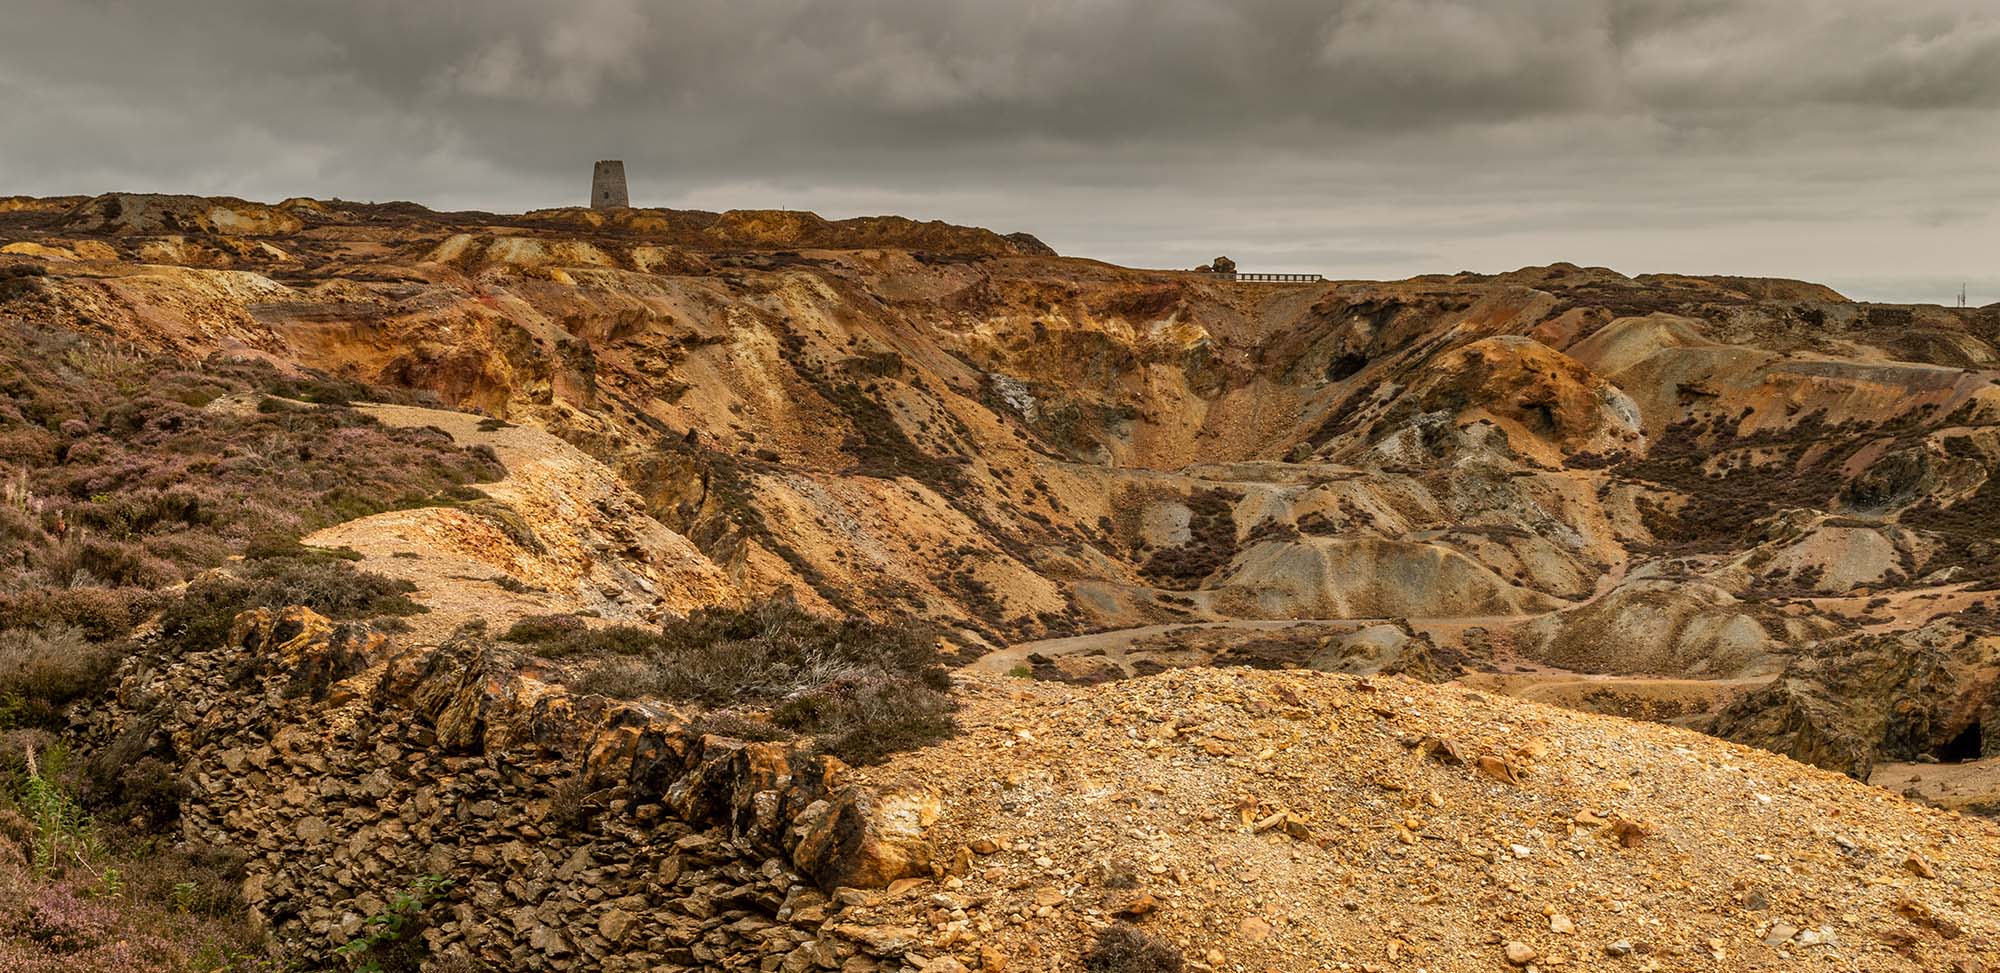 The orange and brown landscape of the disused Parys Mountain copper mine, Anglesey, North Wales.